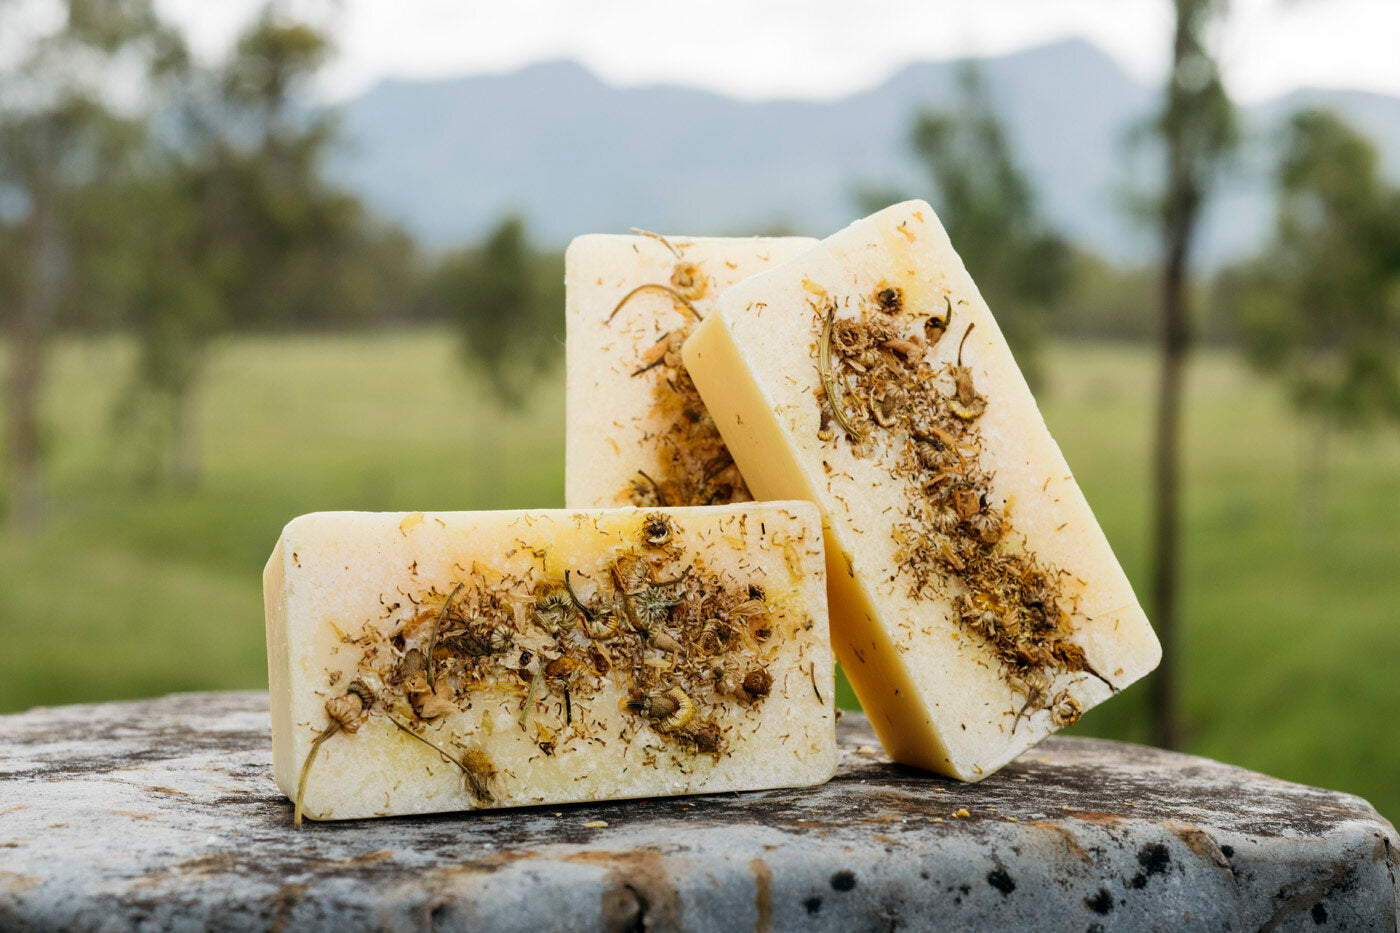 Coco & Myrtle Handmade Bath Products ( Support Rural Produce)